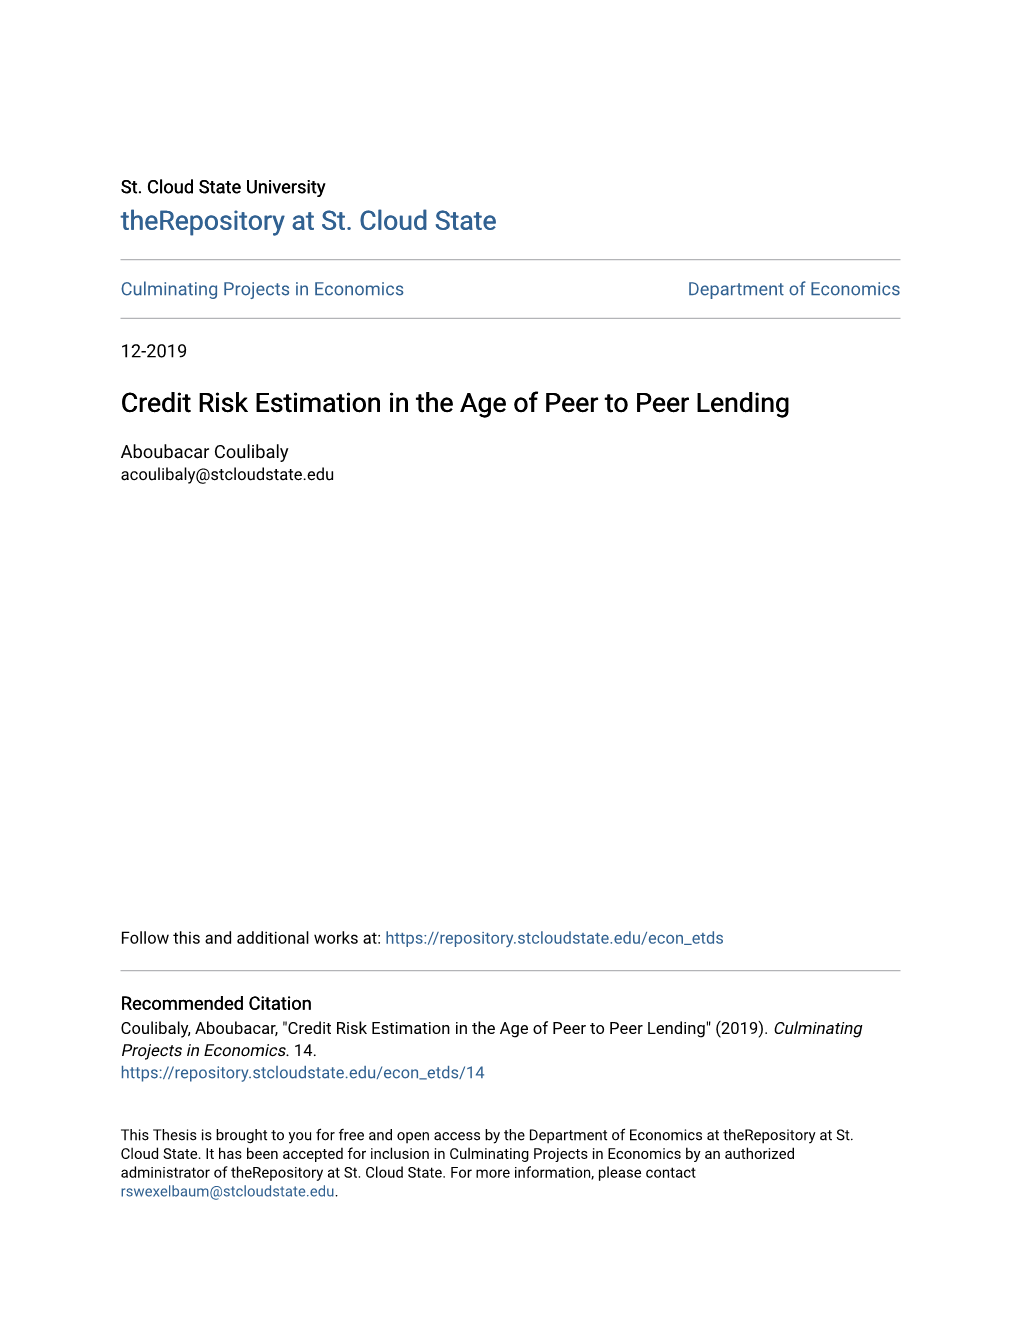 Credit Risk Estimation in the Age of Peer to Peer Lending